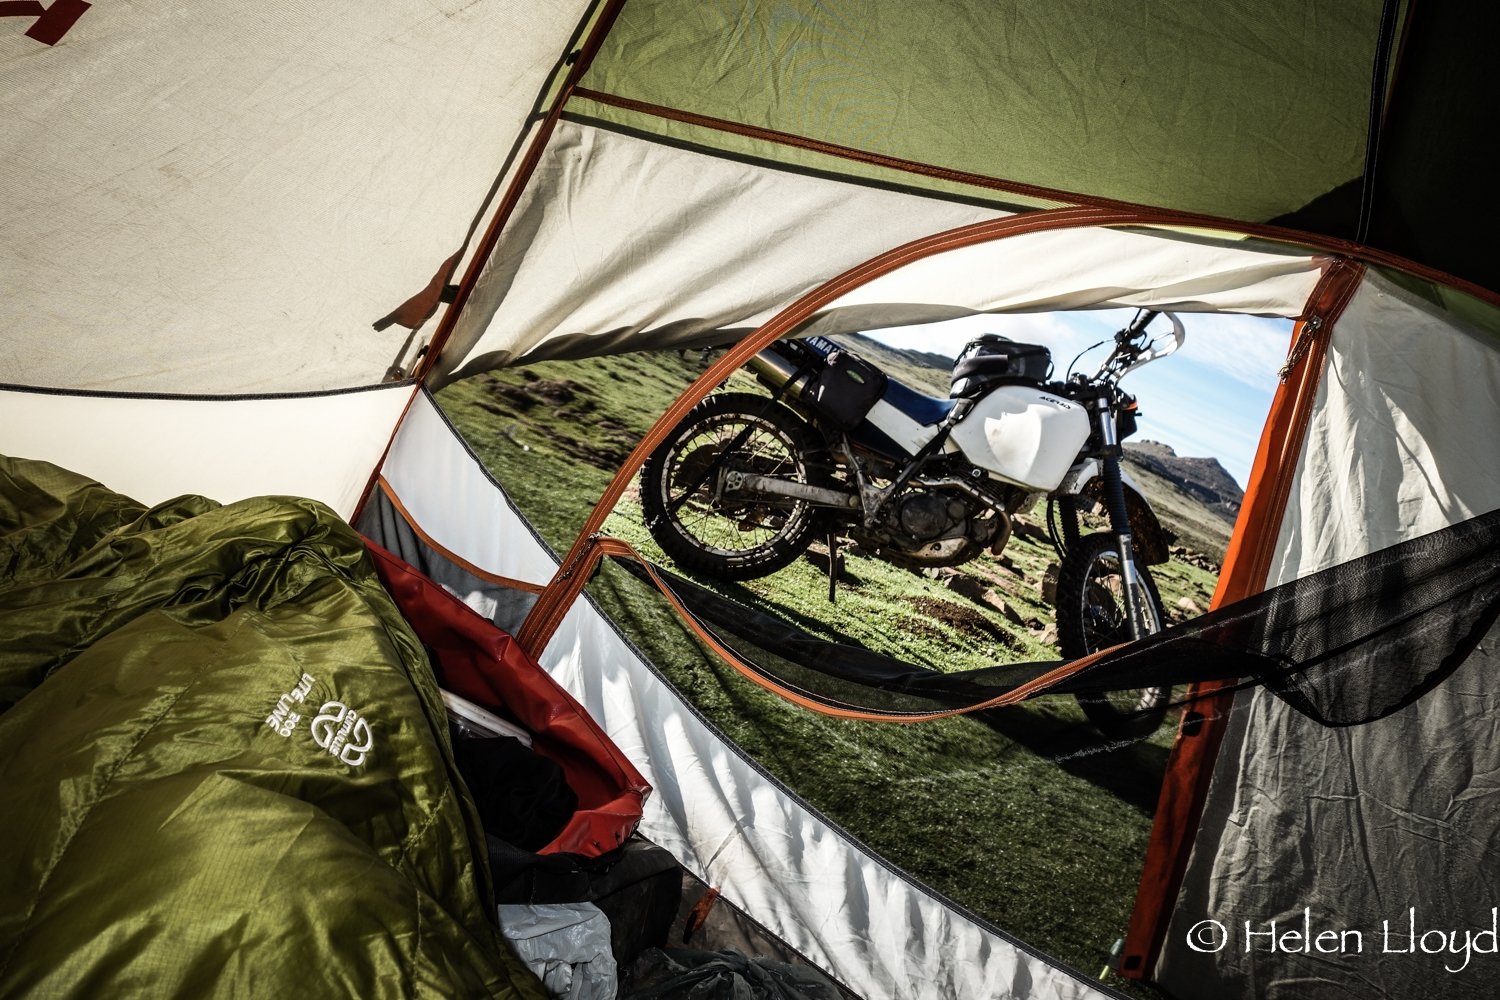  View from inside tent looking out at motorcycle. 